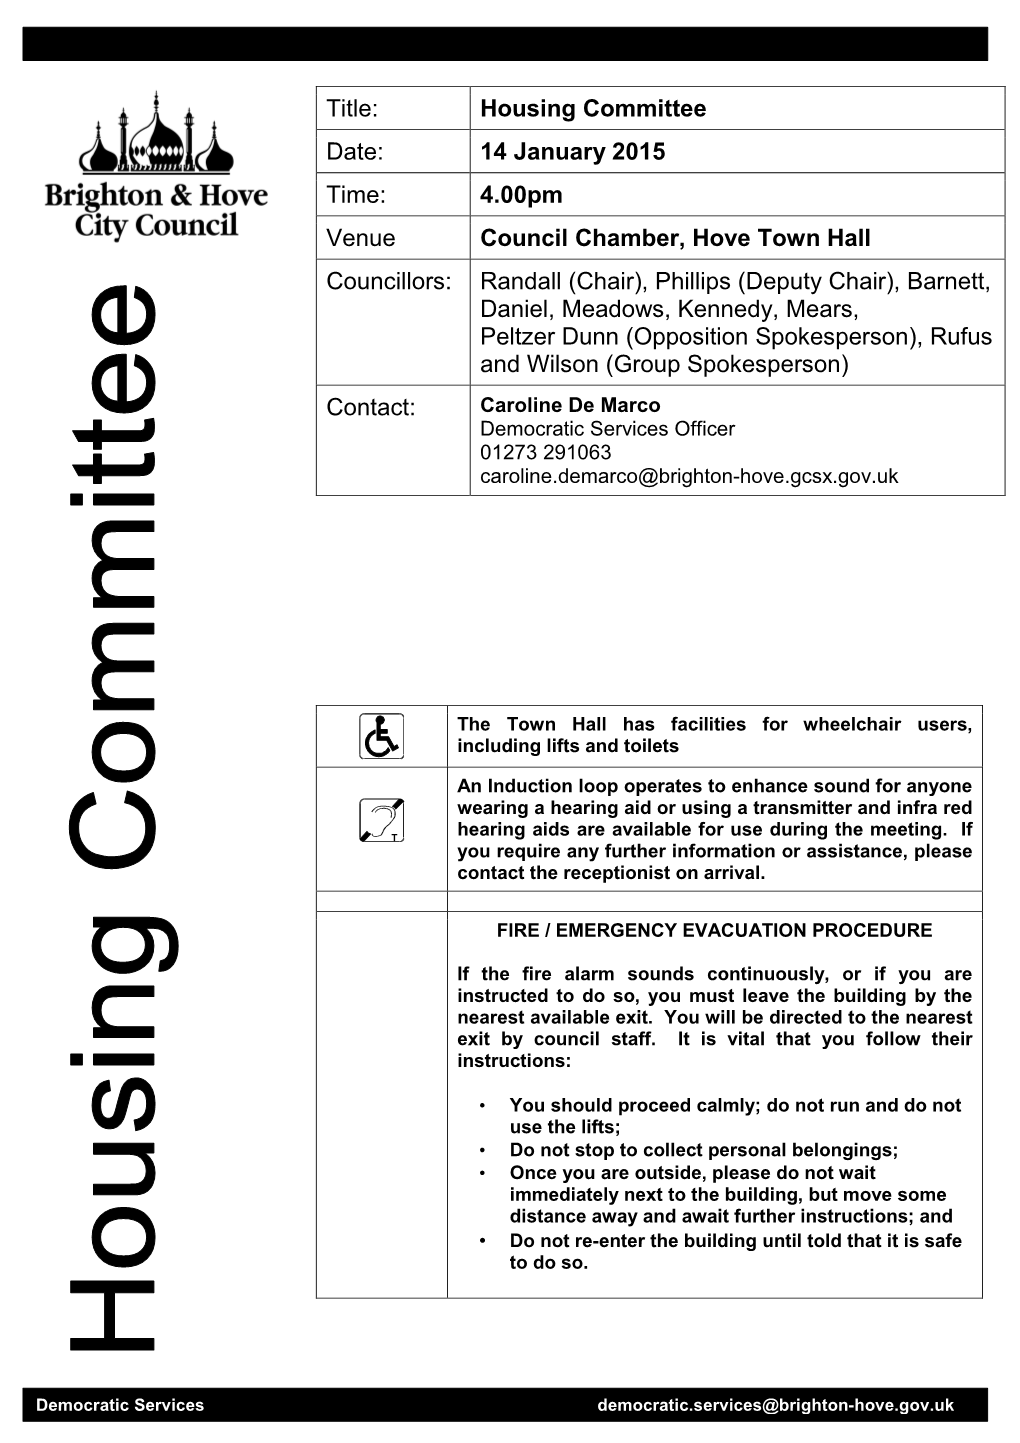 Title: Housing Committee Date: 14 January 2015 Time: 4.00Pm Venue